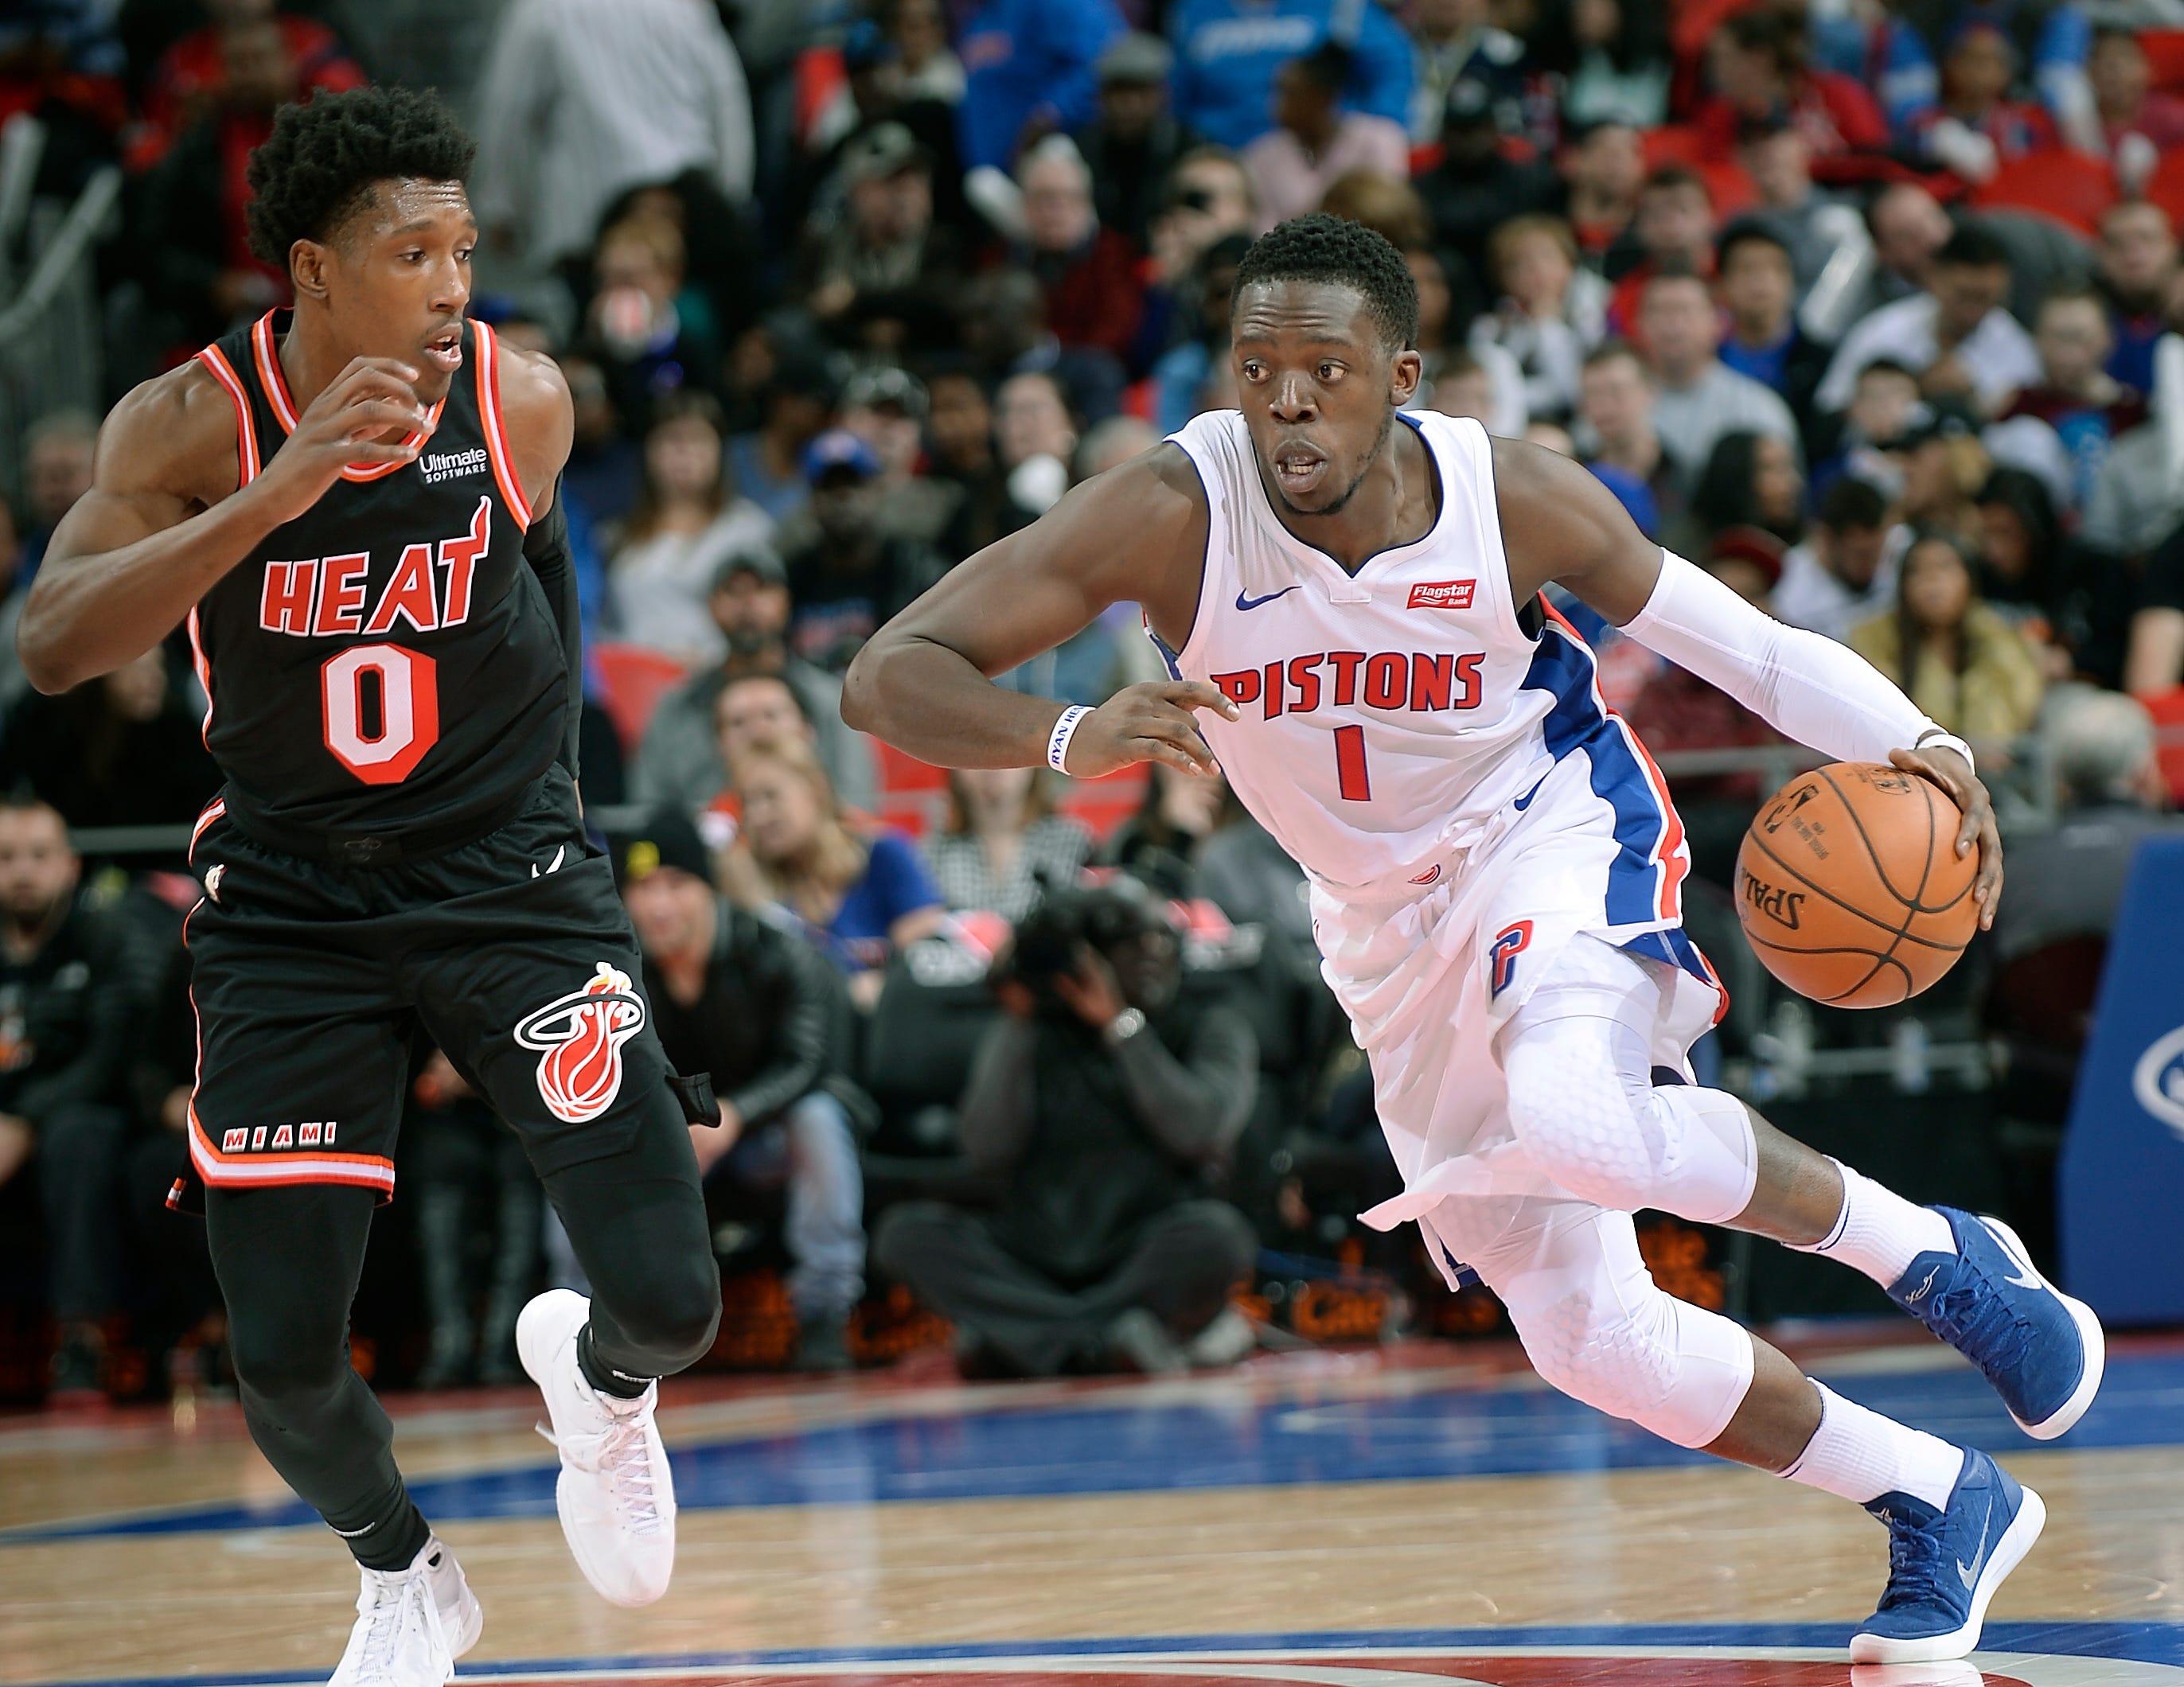 1. Reggie Jackson, G: We’ve seen this movie before — the past two seasons are the only evidence needed to show how important Jackson is. He missed 37 games last season because of a severe ankle sprain and the Pistons went 12-25 in those games. In 2016-17, they were 14-16 without Jackson. He might not be the Pistons' best player, but as the catalyst to their offense, he’s the most valuable to their success.